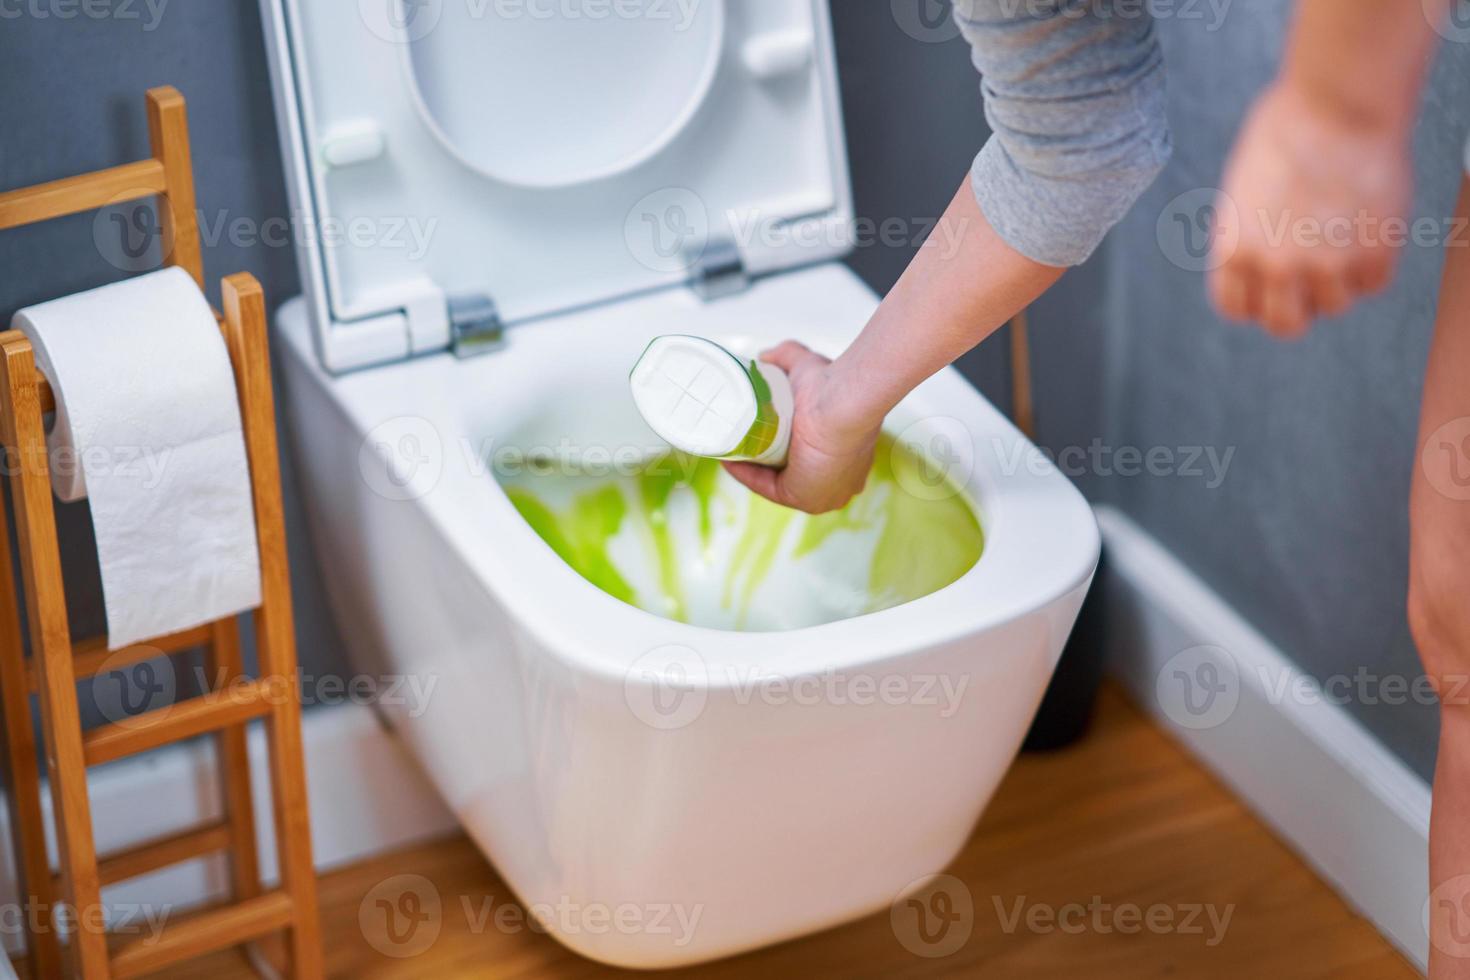 Picture of cleaning toilet seat with chemicals photo